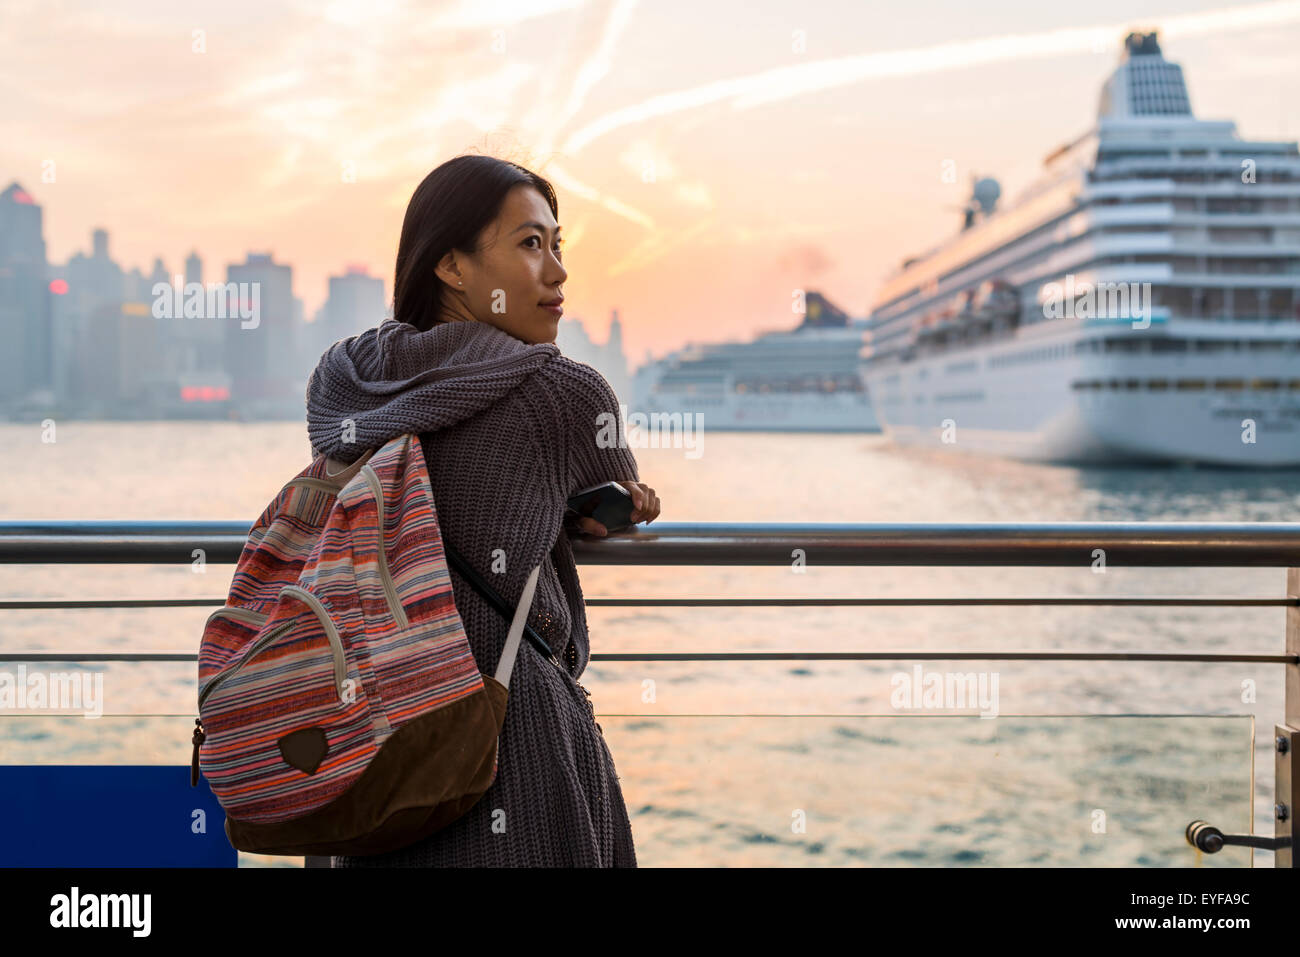 A young woman at the waterfront with cruise ships in the harbour in the background, Kowloon; Hong Kong, China Stock Photo